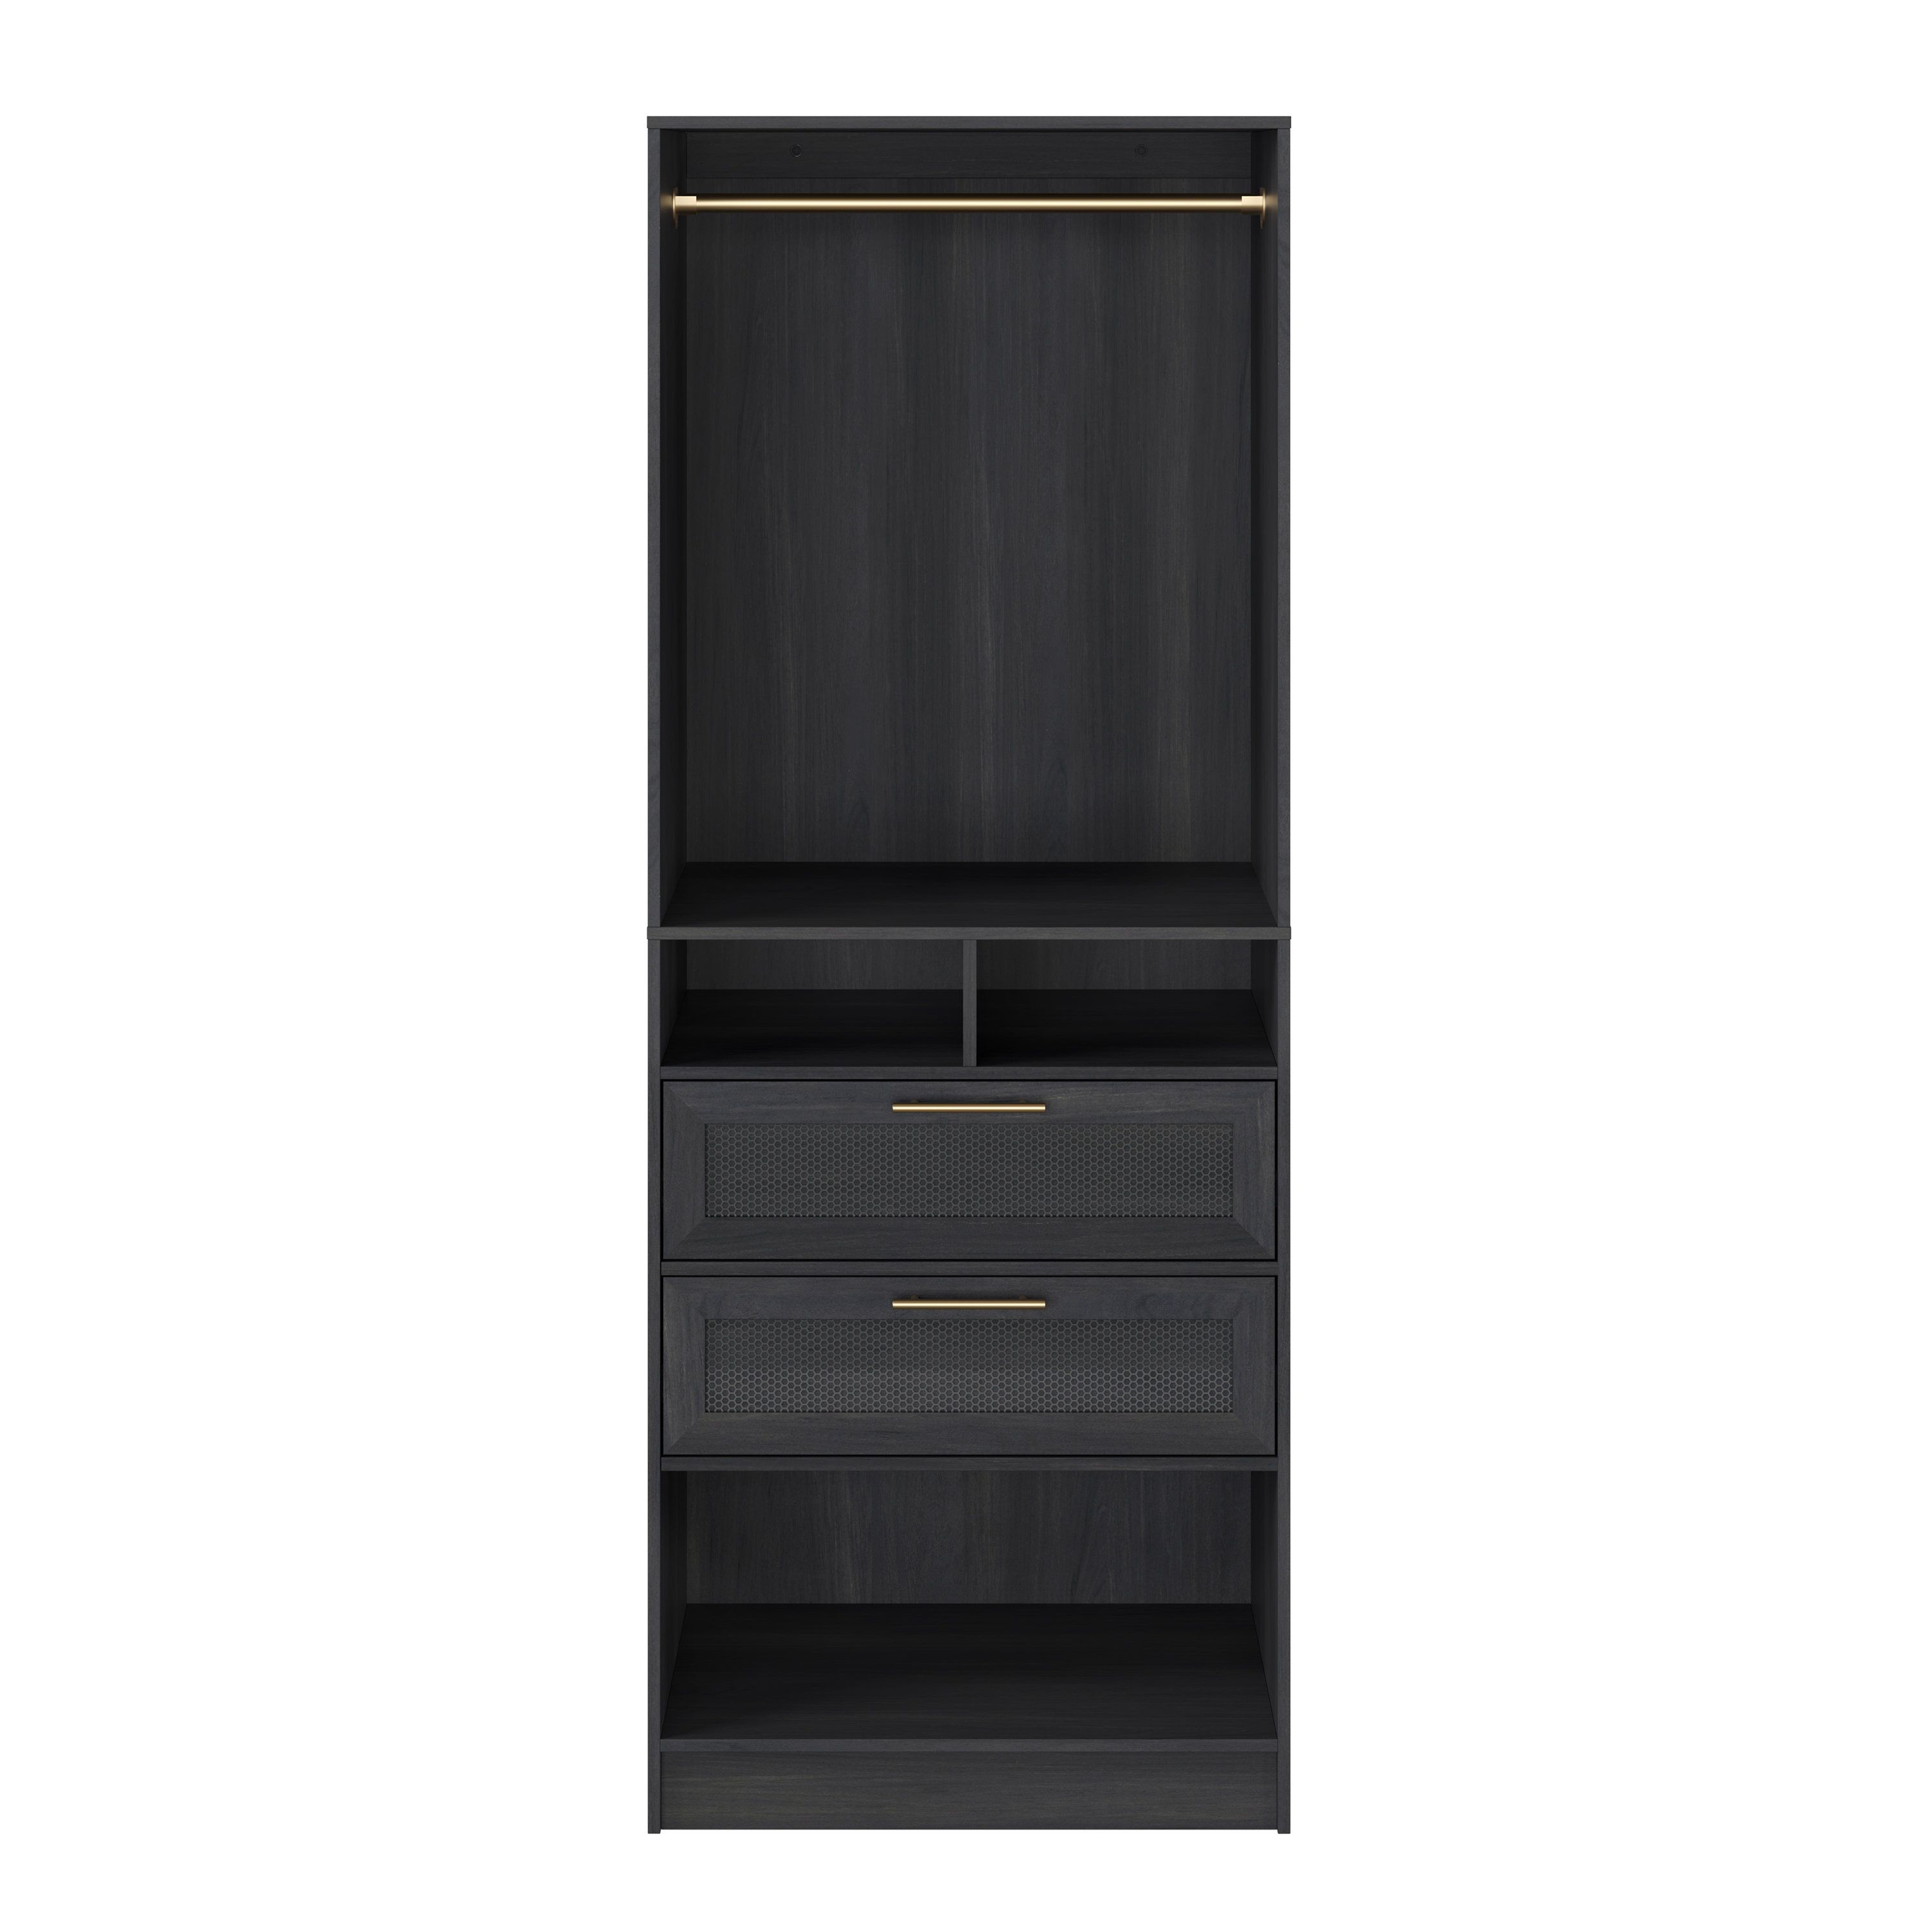 Scott Living Robin 30" Wardrobe Closet With 2 Drawers And 4 Shelves With  Clothes Rod Closet System & Reviews | Wayfair Regarding 2 Separable Wardrobes (View 3 of 15)